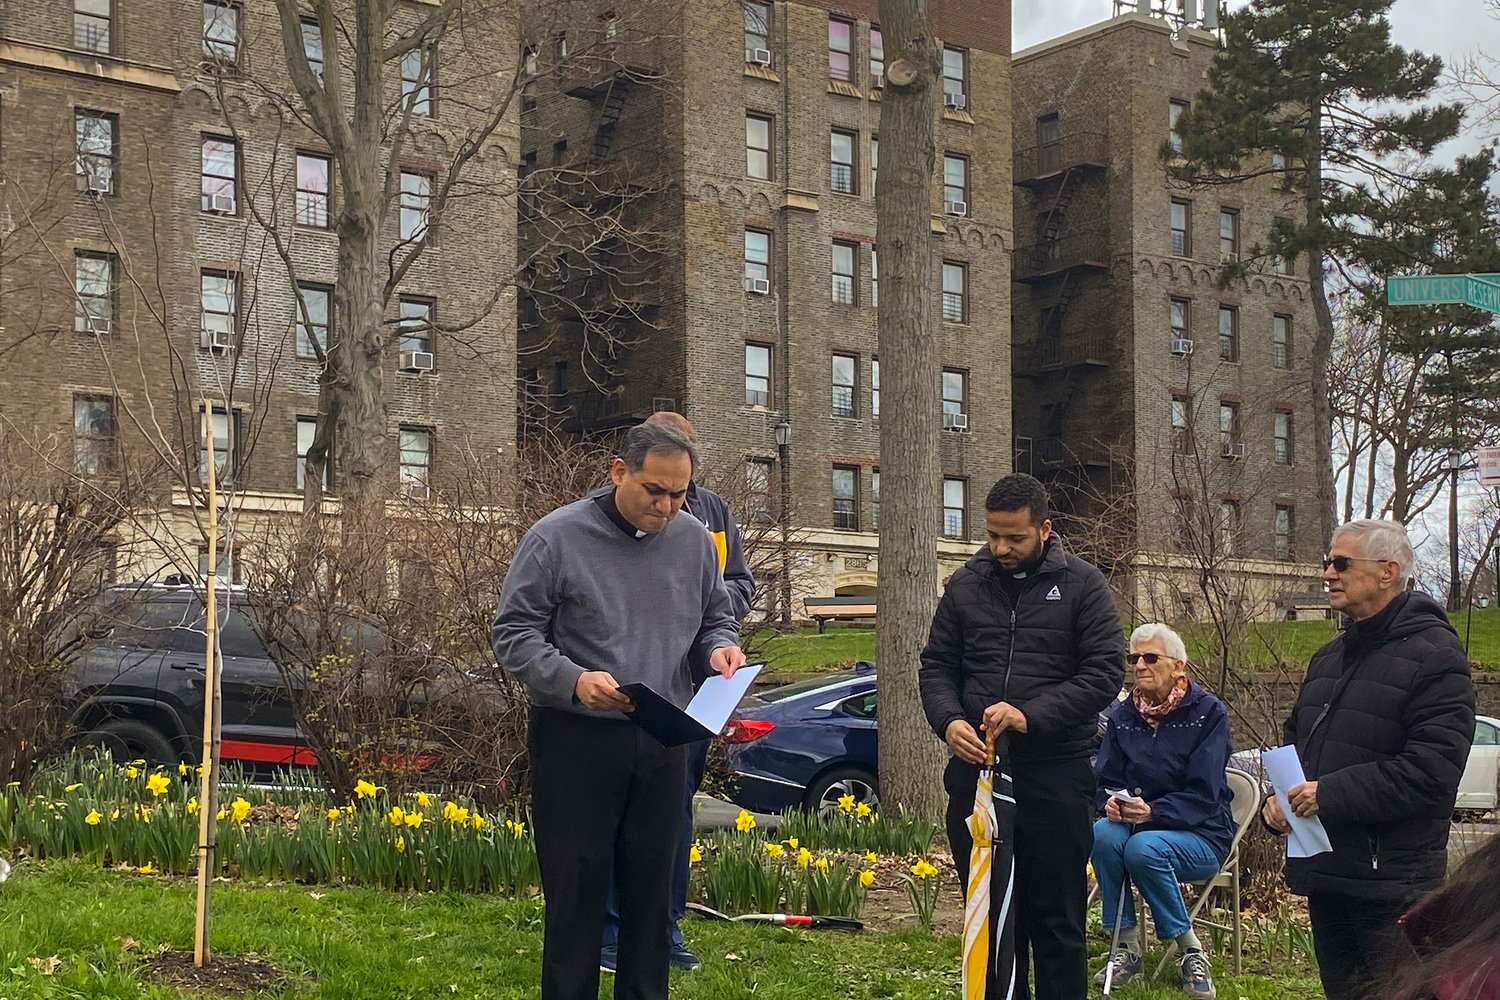 Father Joseph Franco of Out Lady of Angels Church in Kingsbridge Heights blesses three rosebud trees planted in memory of those who perished during COVID-19 over the past two years. The ceremony took place April 9 in a park at the corner of University and Reservoir avenues in Kingsbridge Heights.